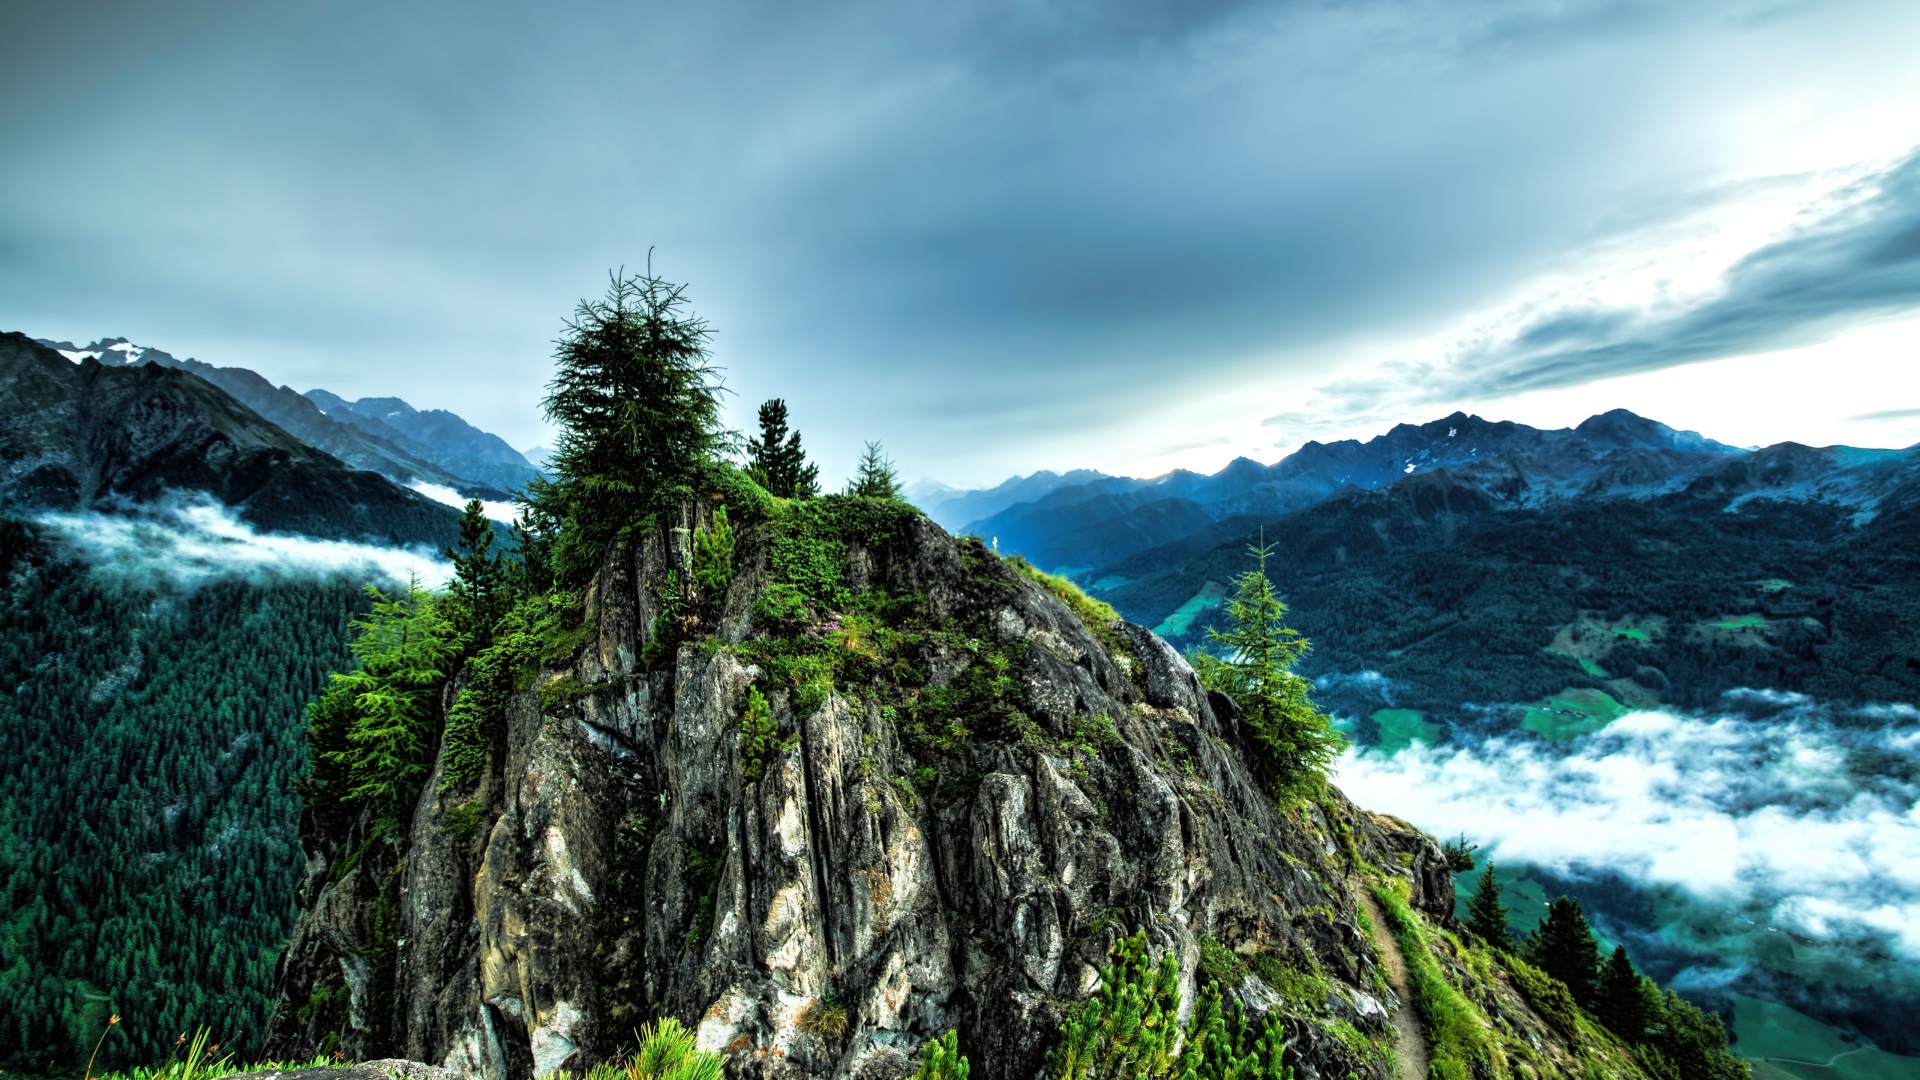 Firs atop a cliff under a cloudy sky